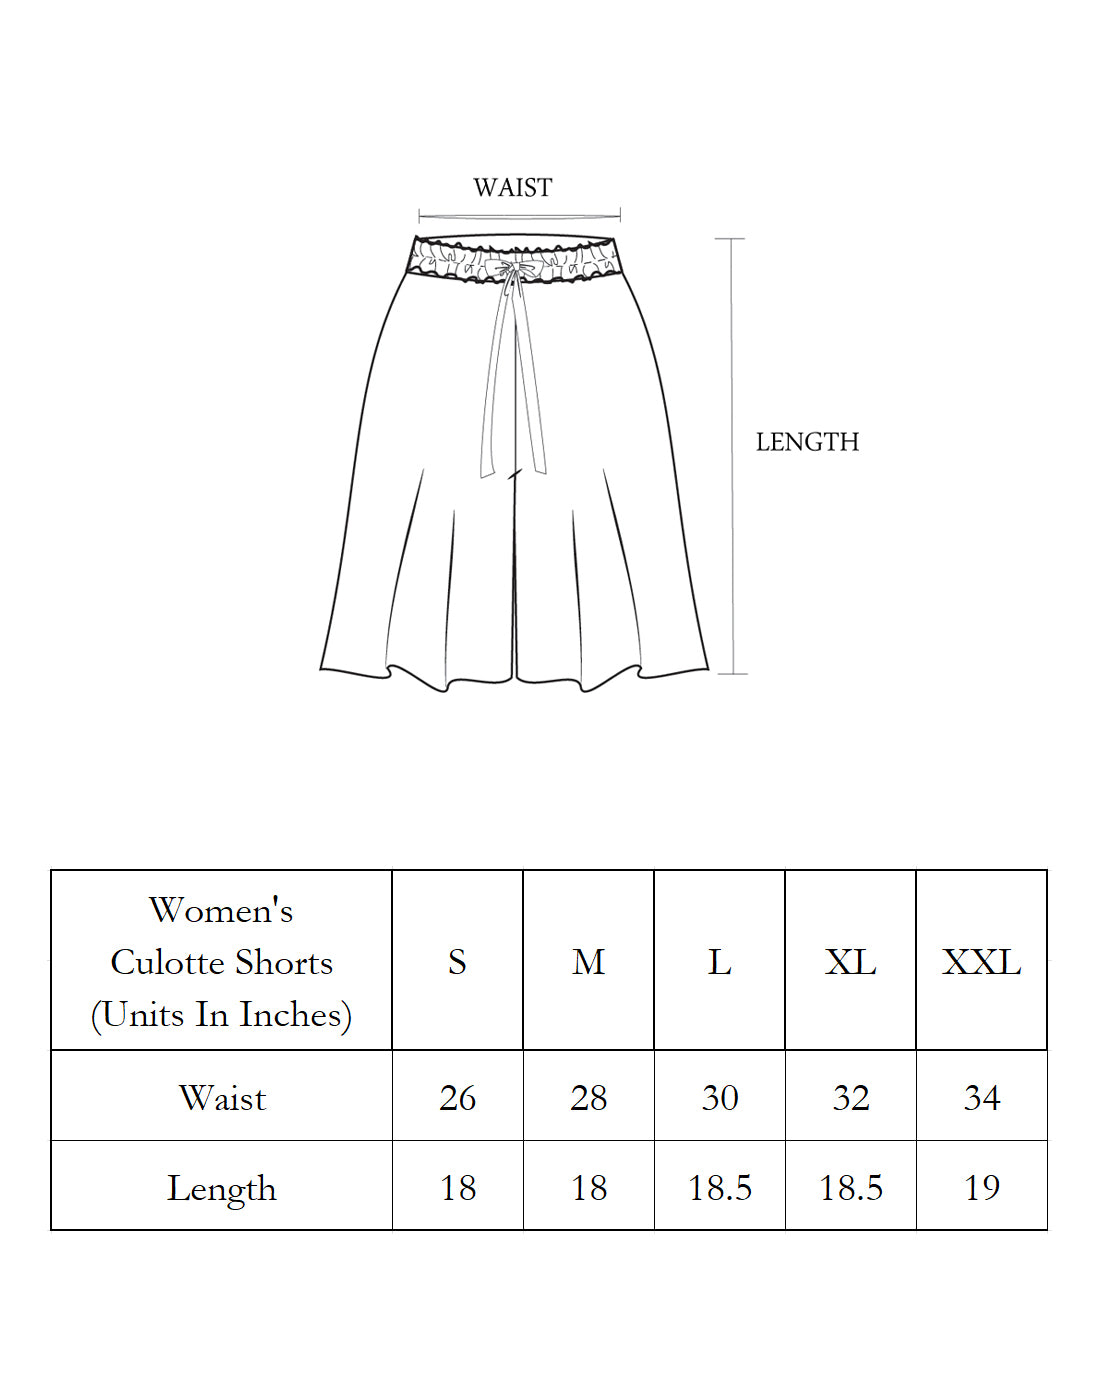 Culottes Shorts for Women-Pink Triangle